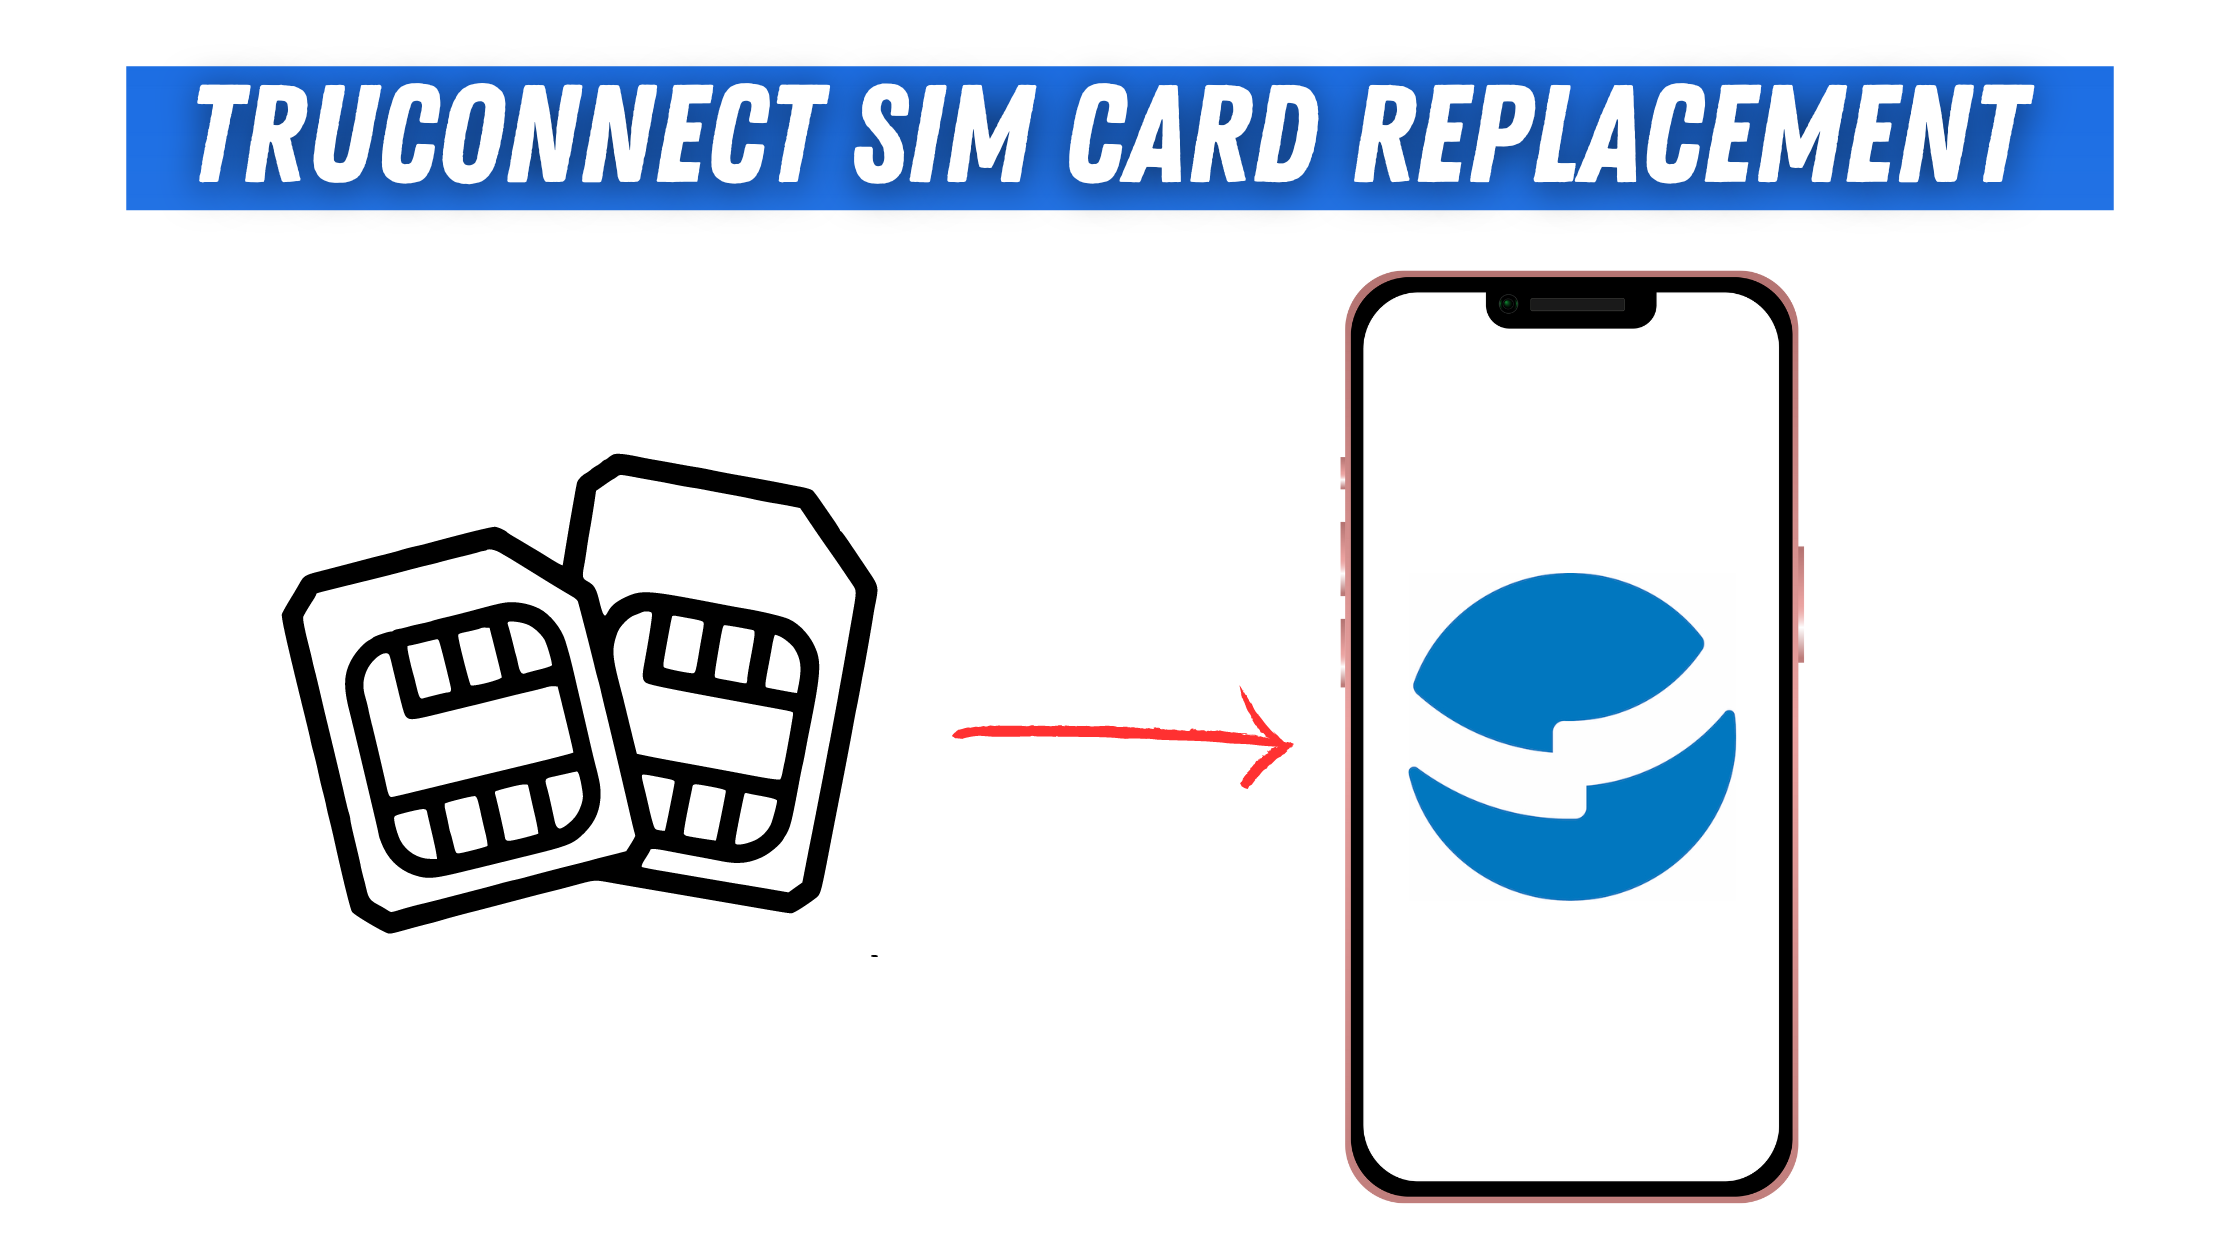 Truconnect SIM card replacement guide